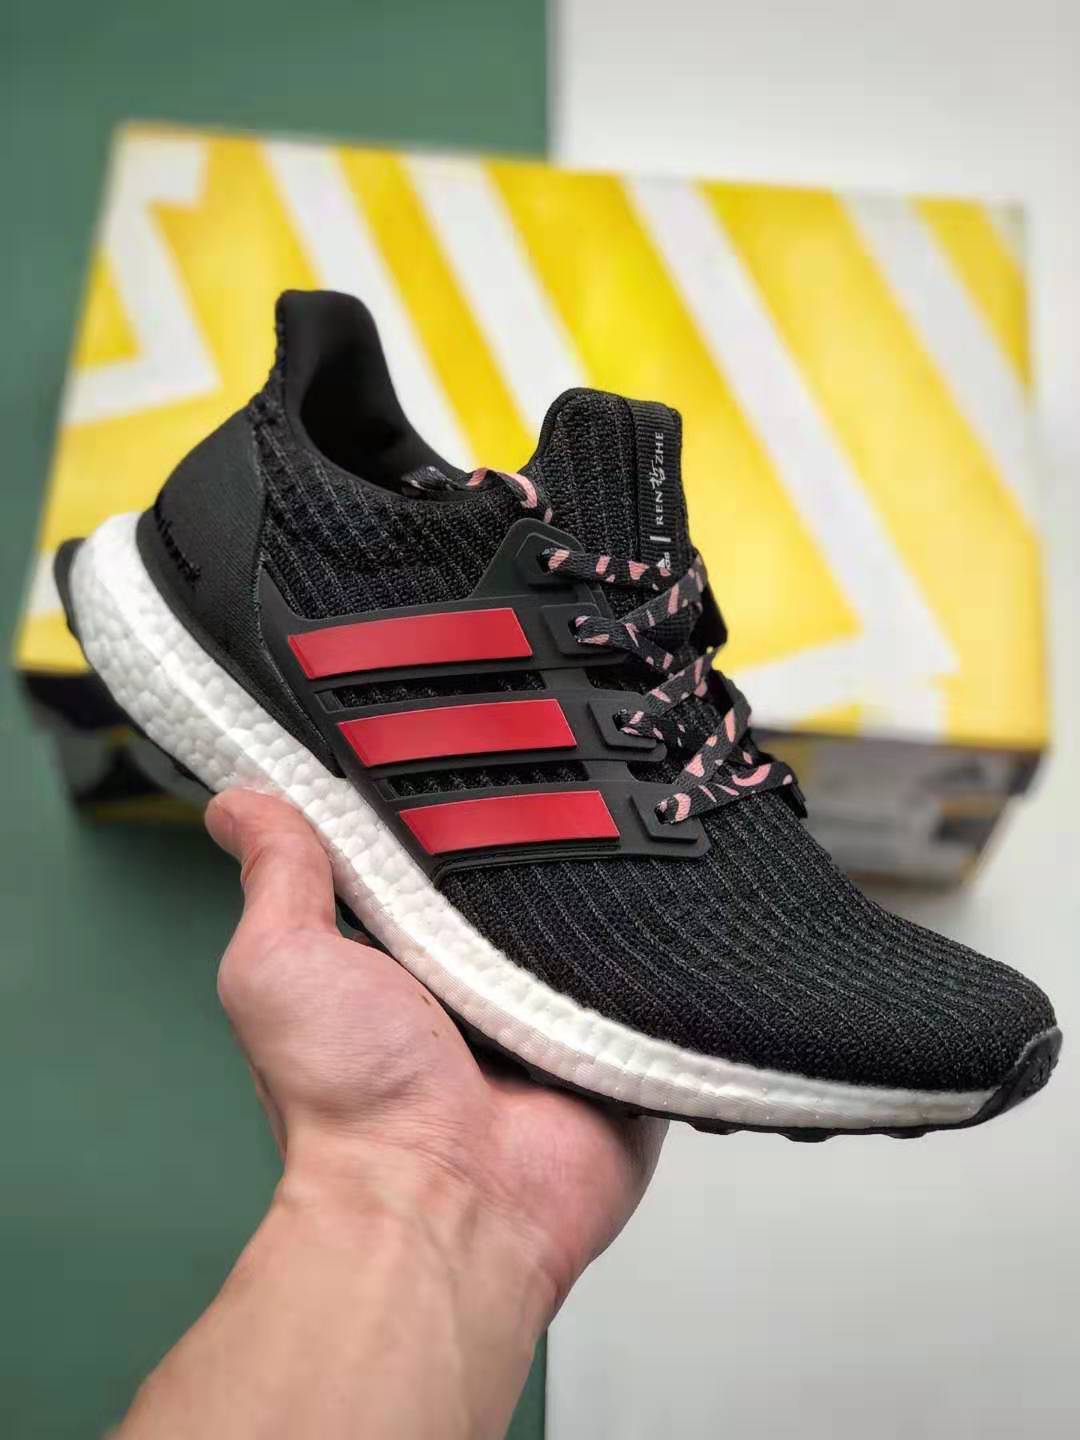 Adidas Ren Zhe x UltraBoost 4.0 'Chinese New Year' Shoes - Limited Edition